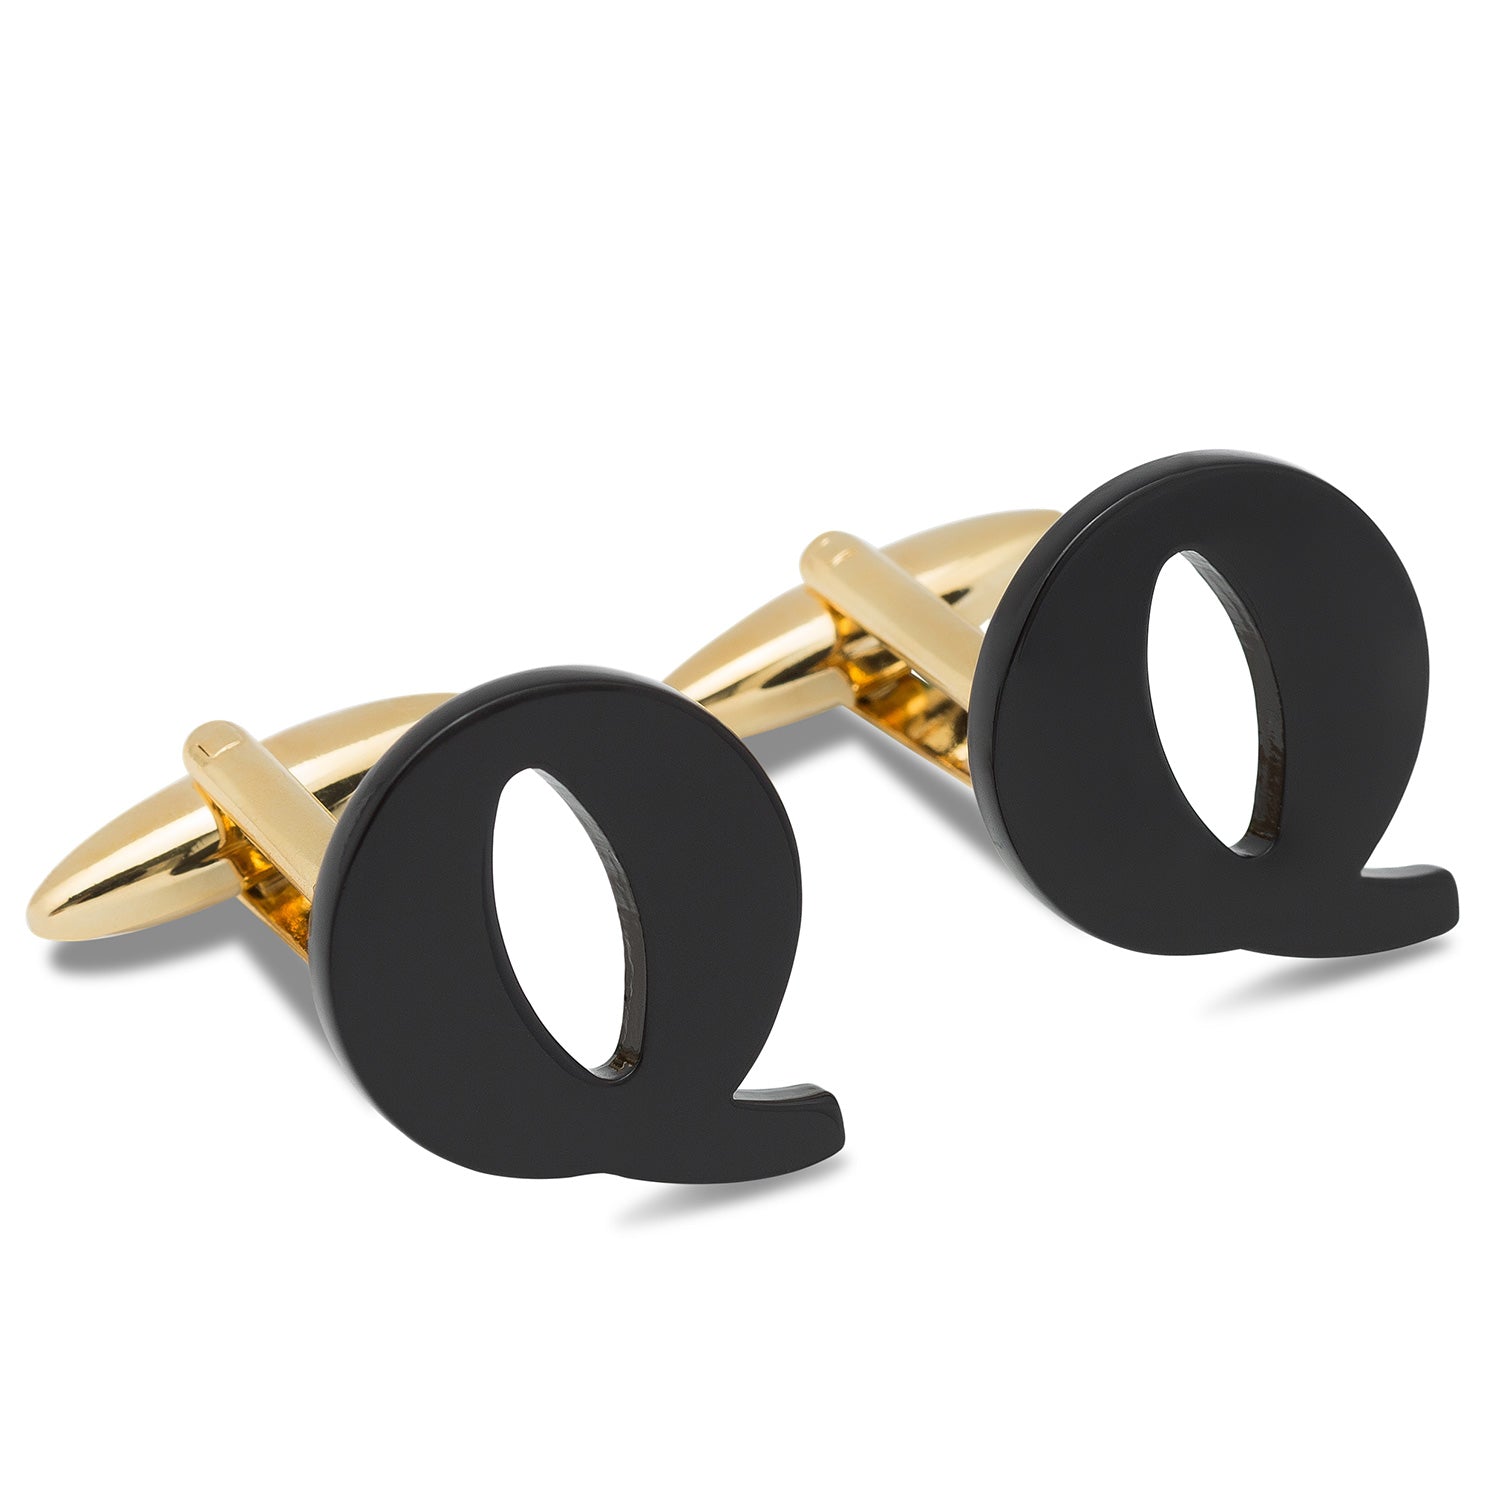 Black And Gold Letter Q Cufflink